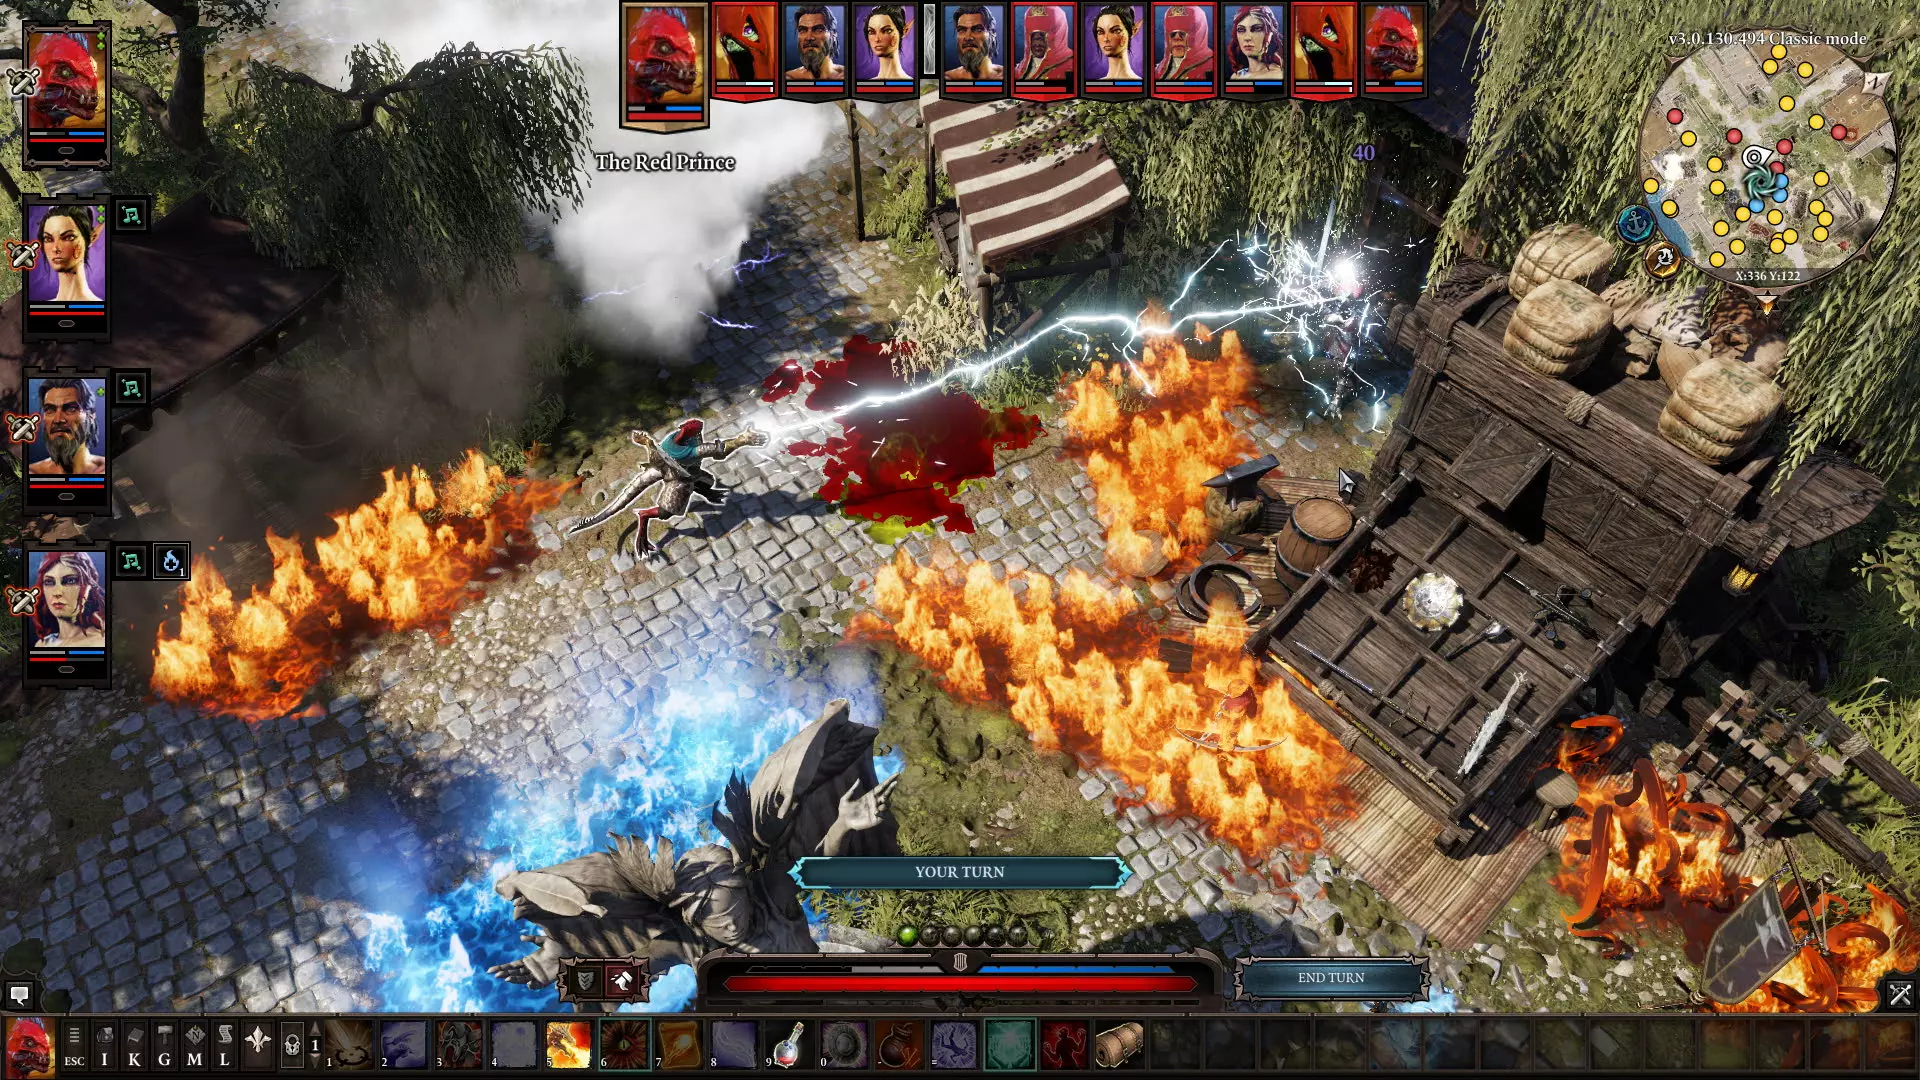 In Divinity: Original Sin, your spells and actions interact in a sandbox